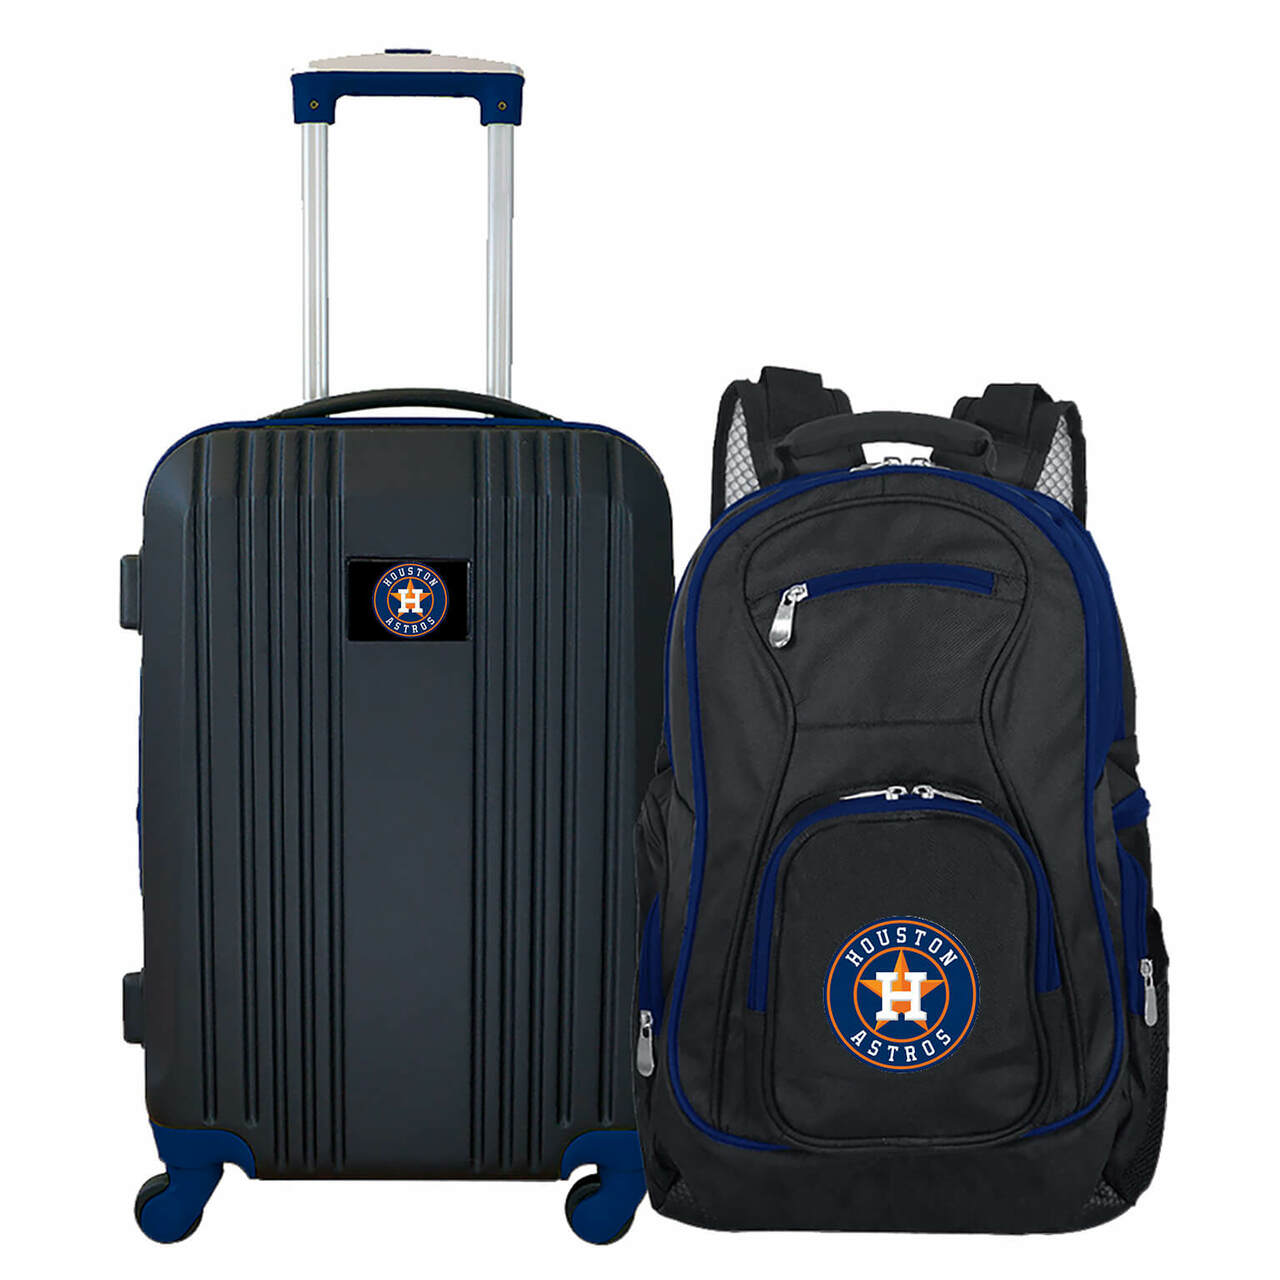 Houston Astros 2 Piece Premium Colored Trim Backpack and Luggage Set